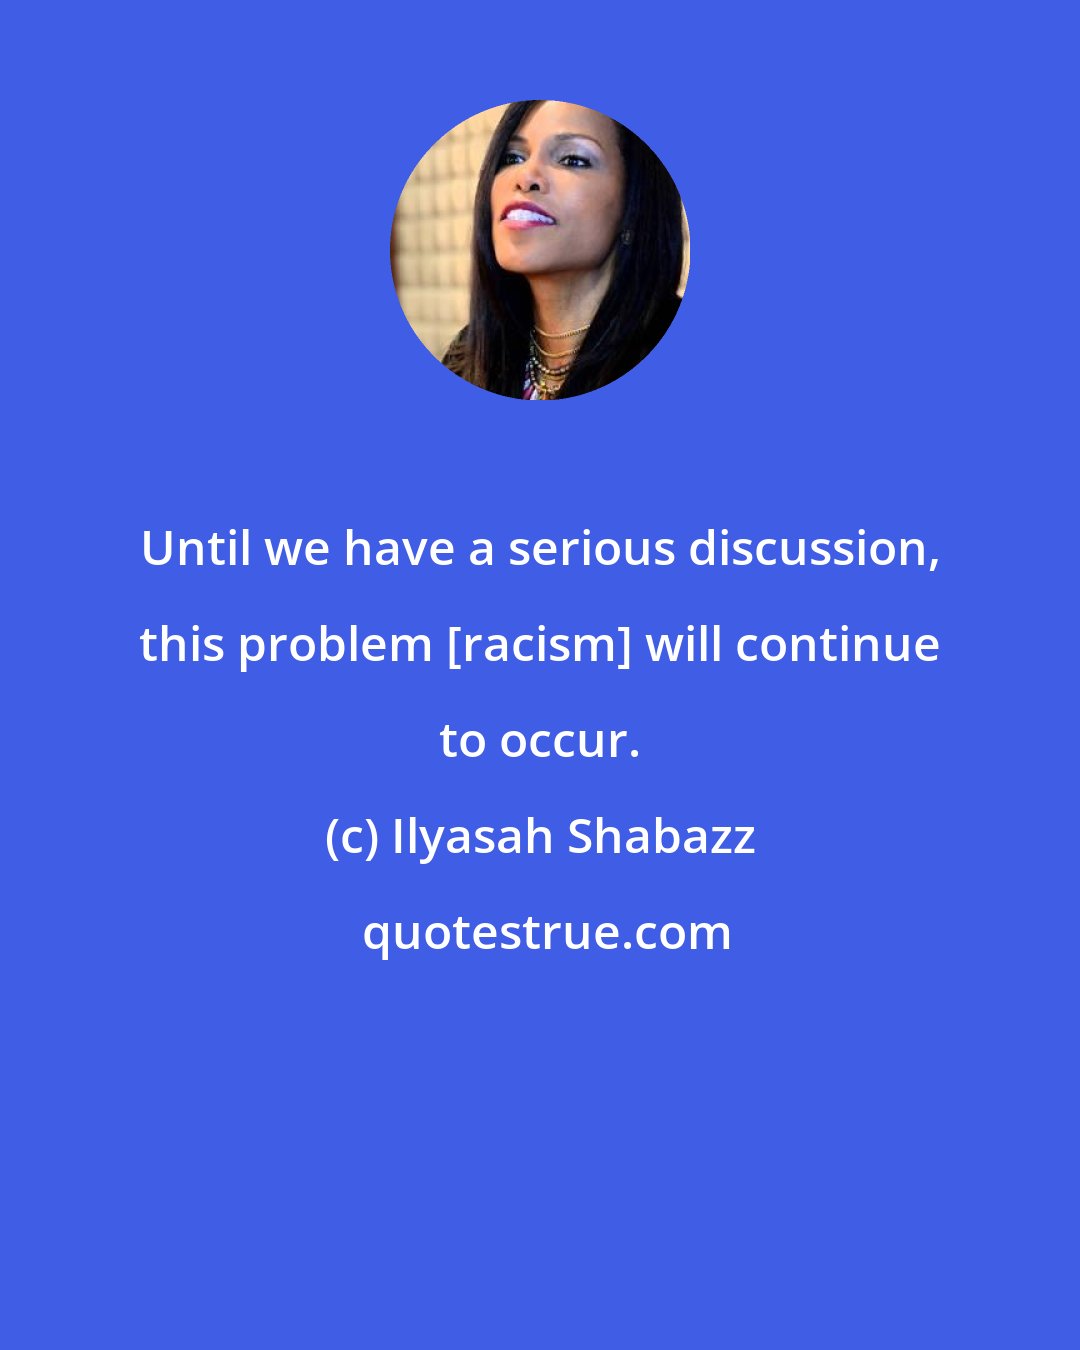 Ilyasah Shabazz: Until we have a serious discussion, this problem [racism] will continue to occur.